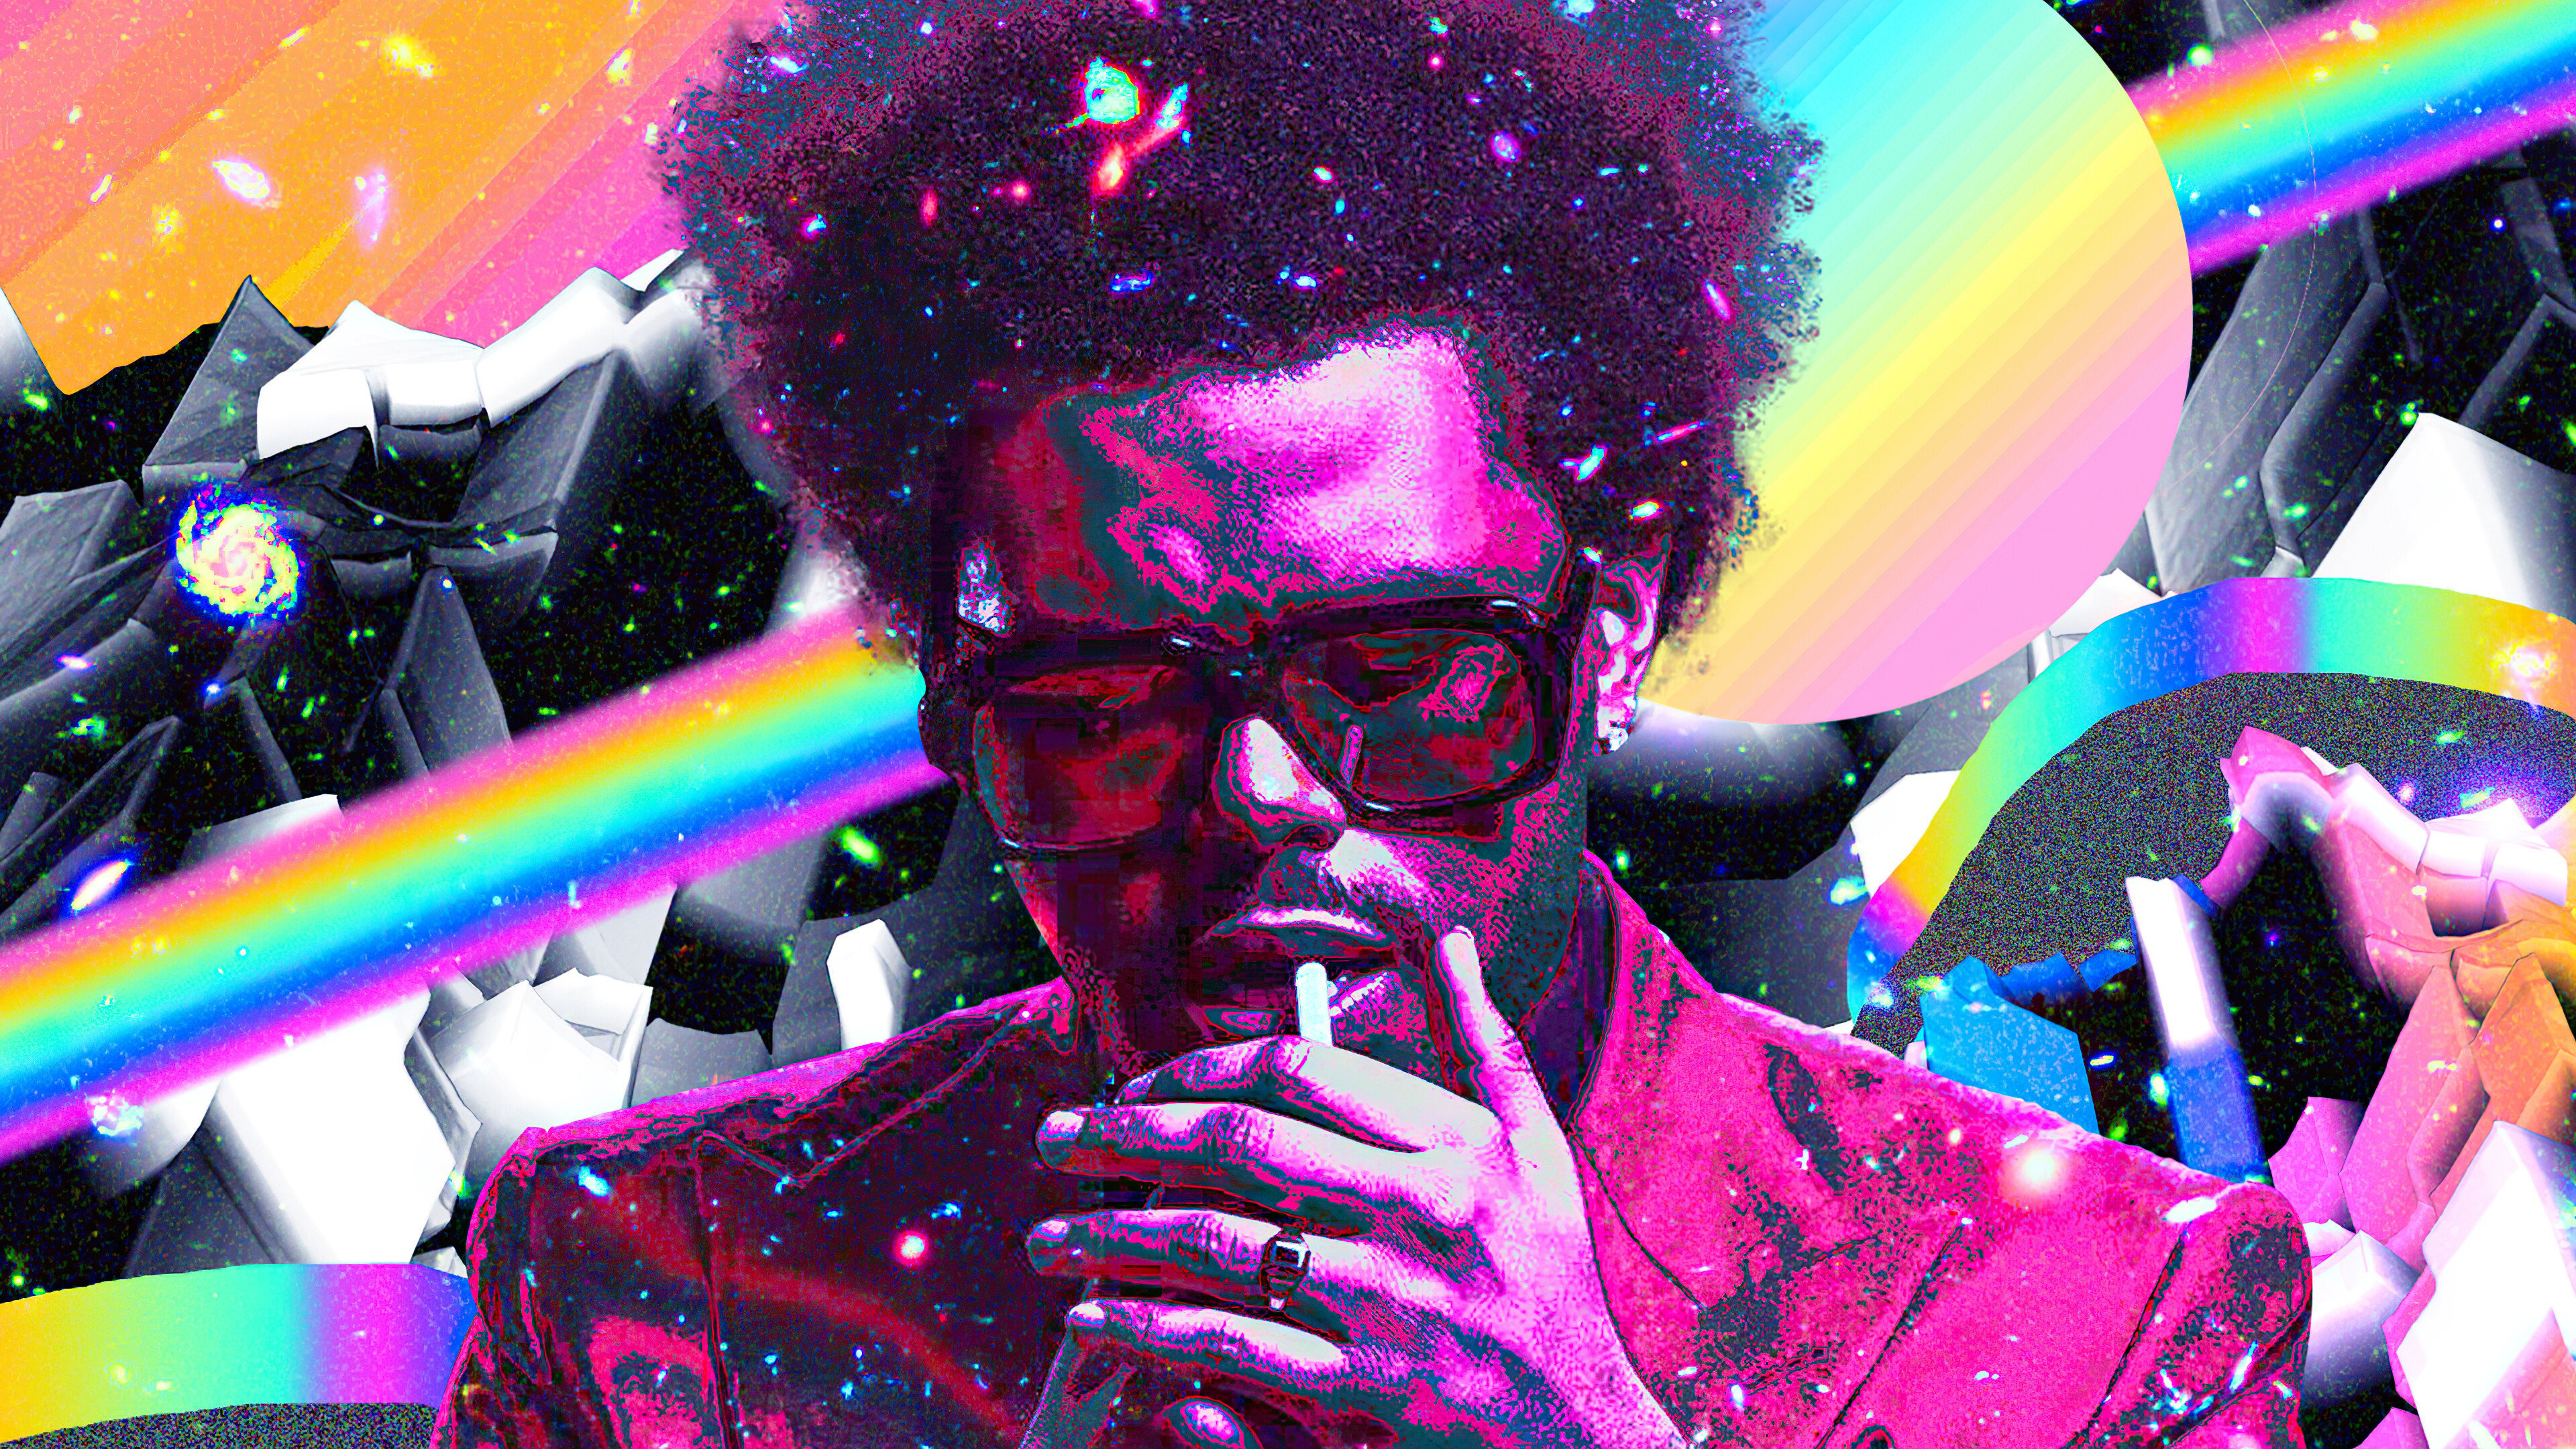 Wallpaper The Weeknd Colorful Art.